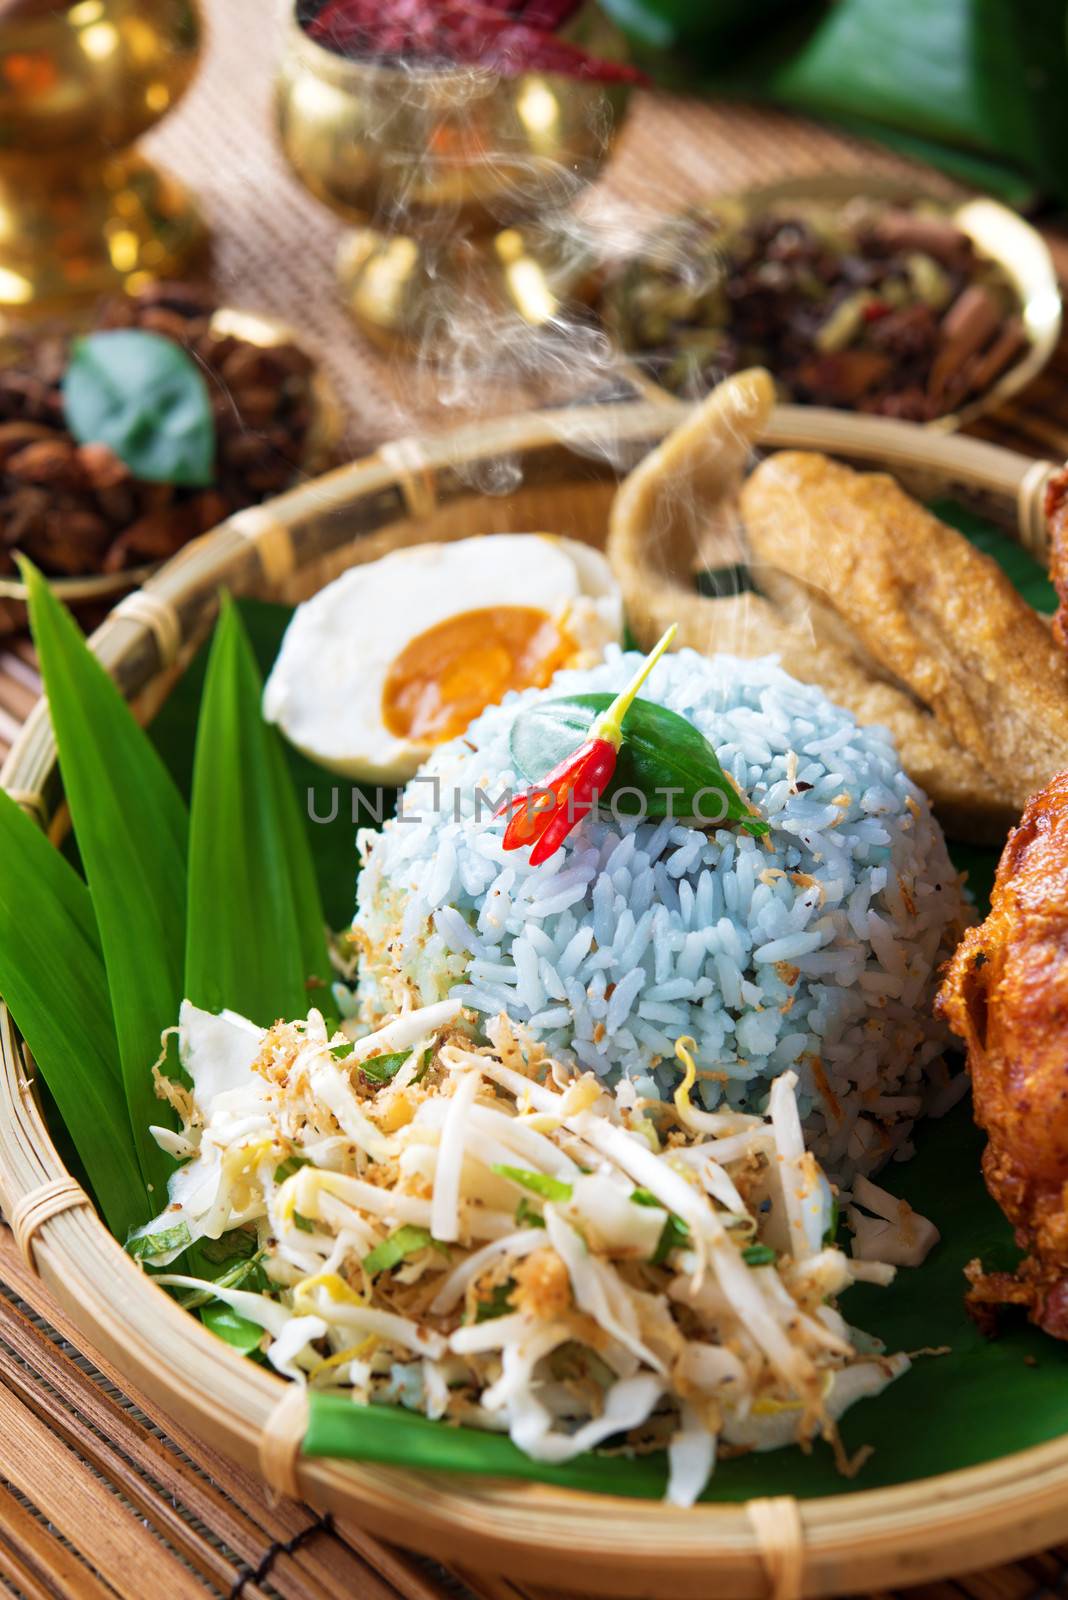 Nasi kerabu is a type of nasi ulam, popular delicious Malay rice dish. Blue color of rice resulting from the petals of  butterfly-pea flowers. Traditional Malaysian food, Asian cuisine.